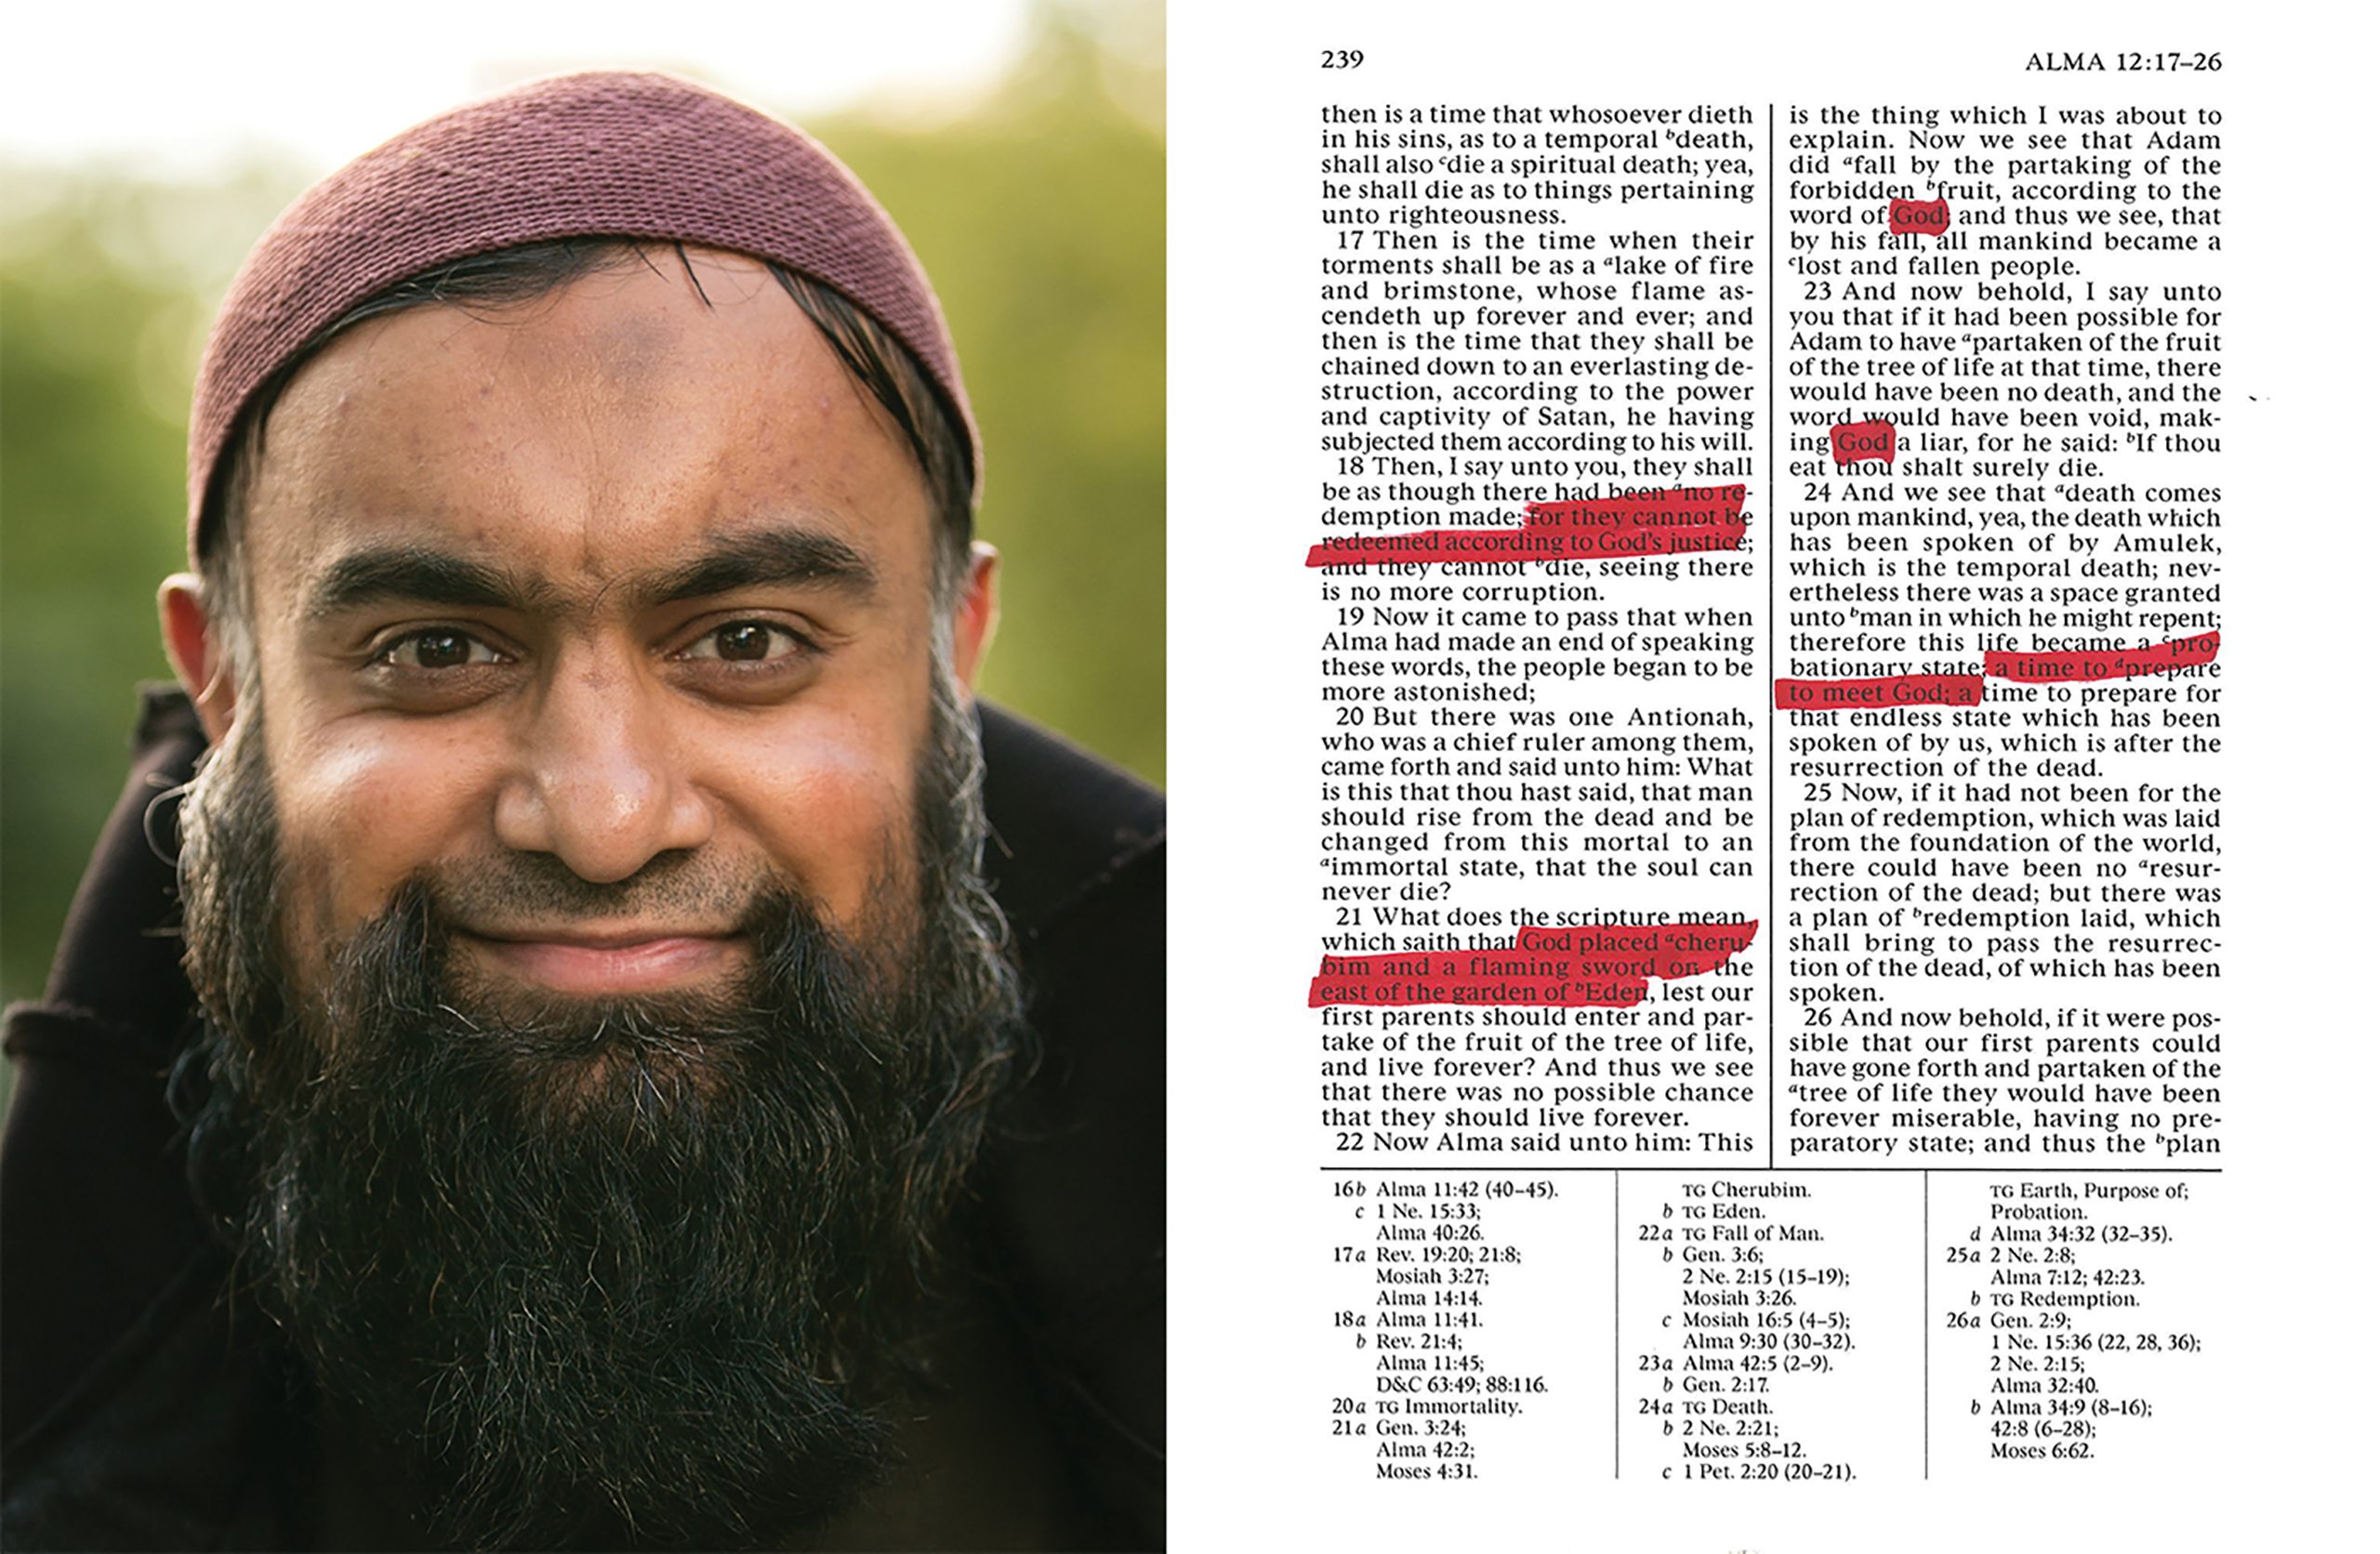 Nazam, a Muslim man from the UKand the page of the Book of Mormon that he read.